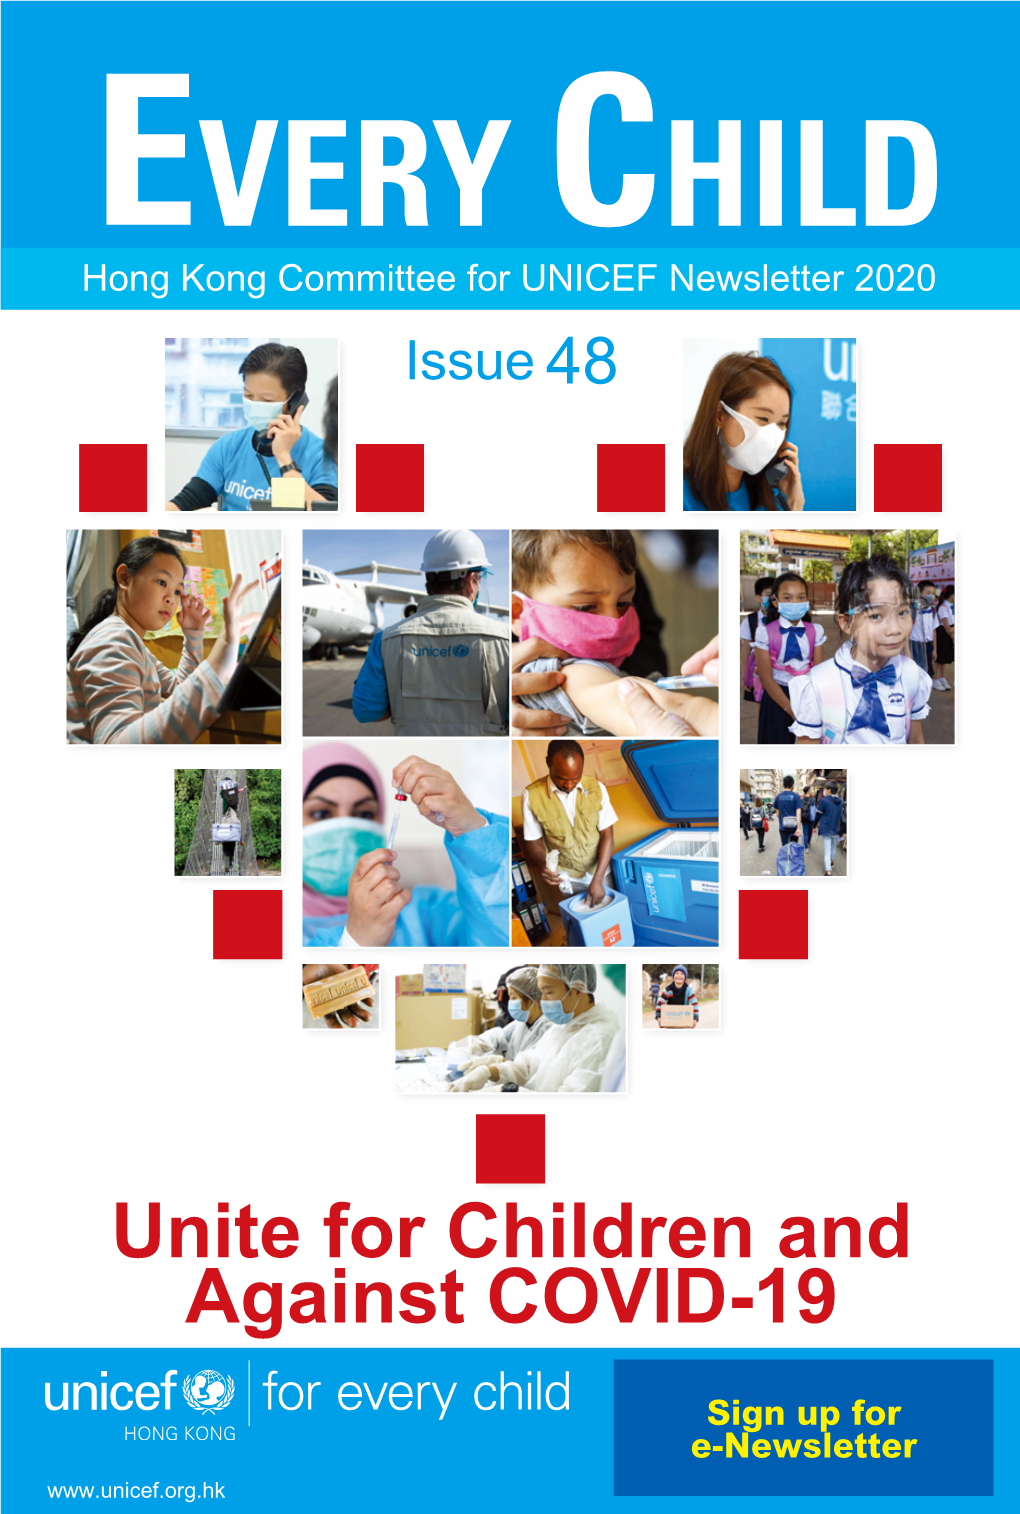 EVERY CHILD Hong Kong Committee for UNICEF Newsletter 2020 Issue 48